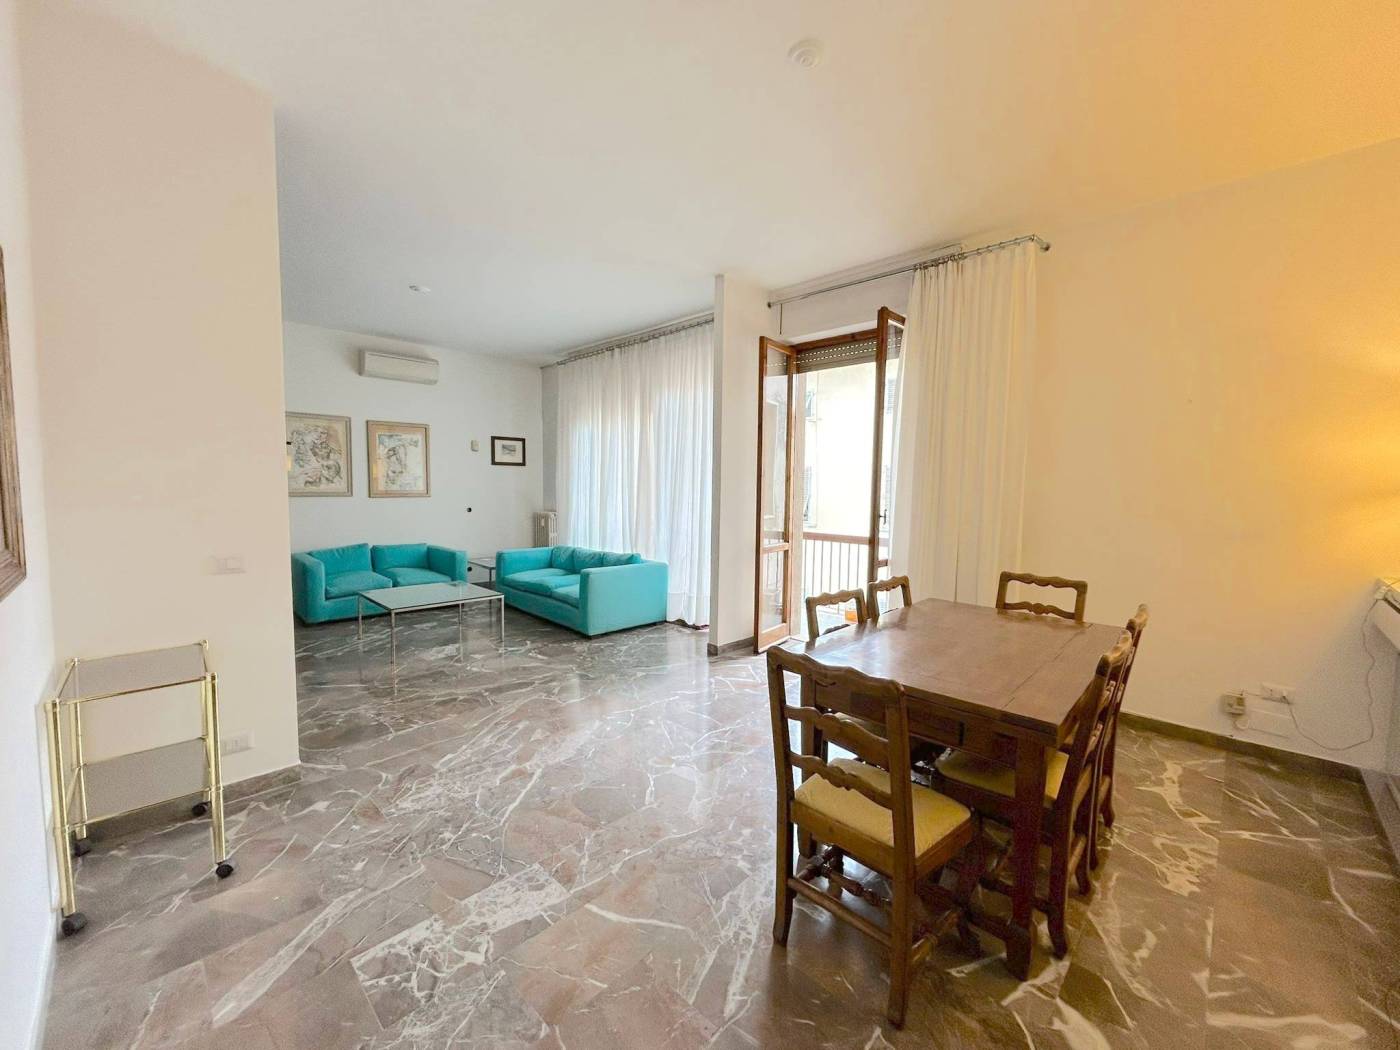 REF. AF000AMCH, FLORENCE, BECCARIA, Apartment 130 m2. 3 bedrooms, two bathrooms. PARKING SPACE. FREE Eu.2,500 + TRANSITIONAL CONTRACT EXPENSES In a 